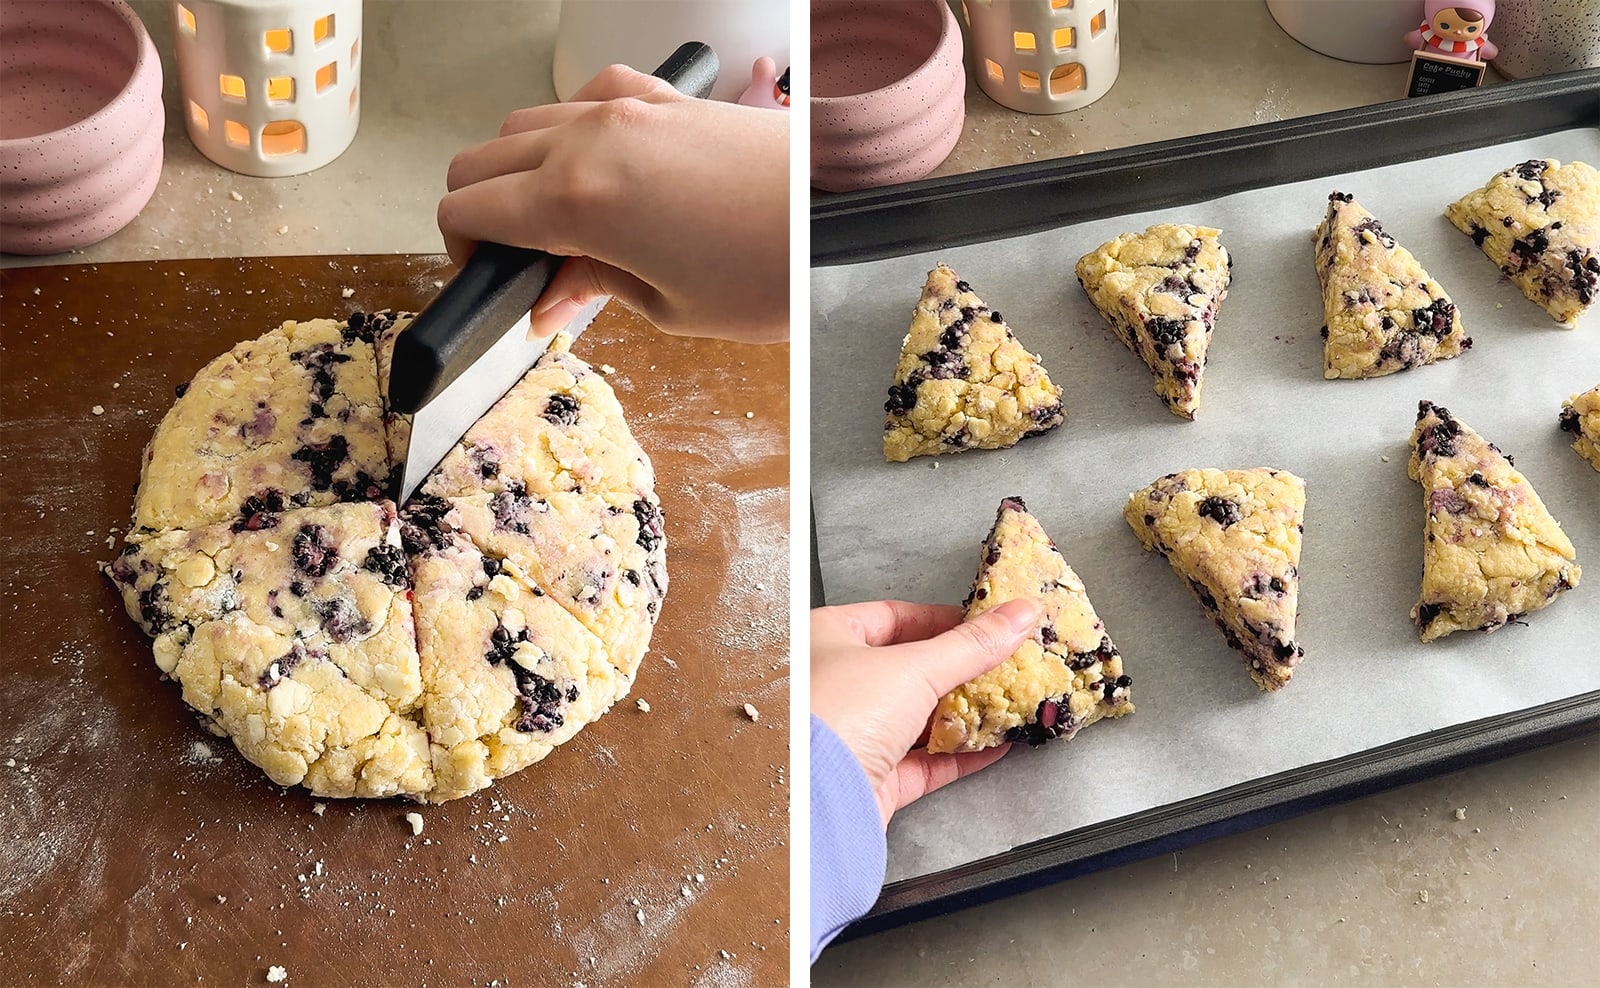 Left to right: cutting scone dough into wedges with a bench scraper, hand placing a wedge of scone dough on a baking sheet with other scones on it.